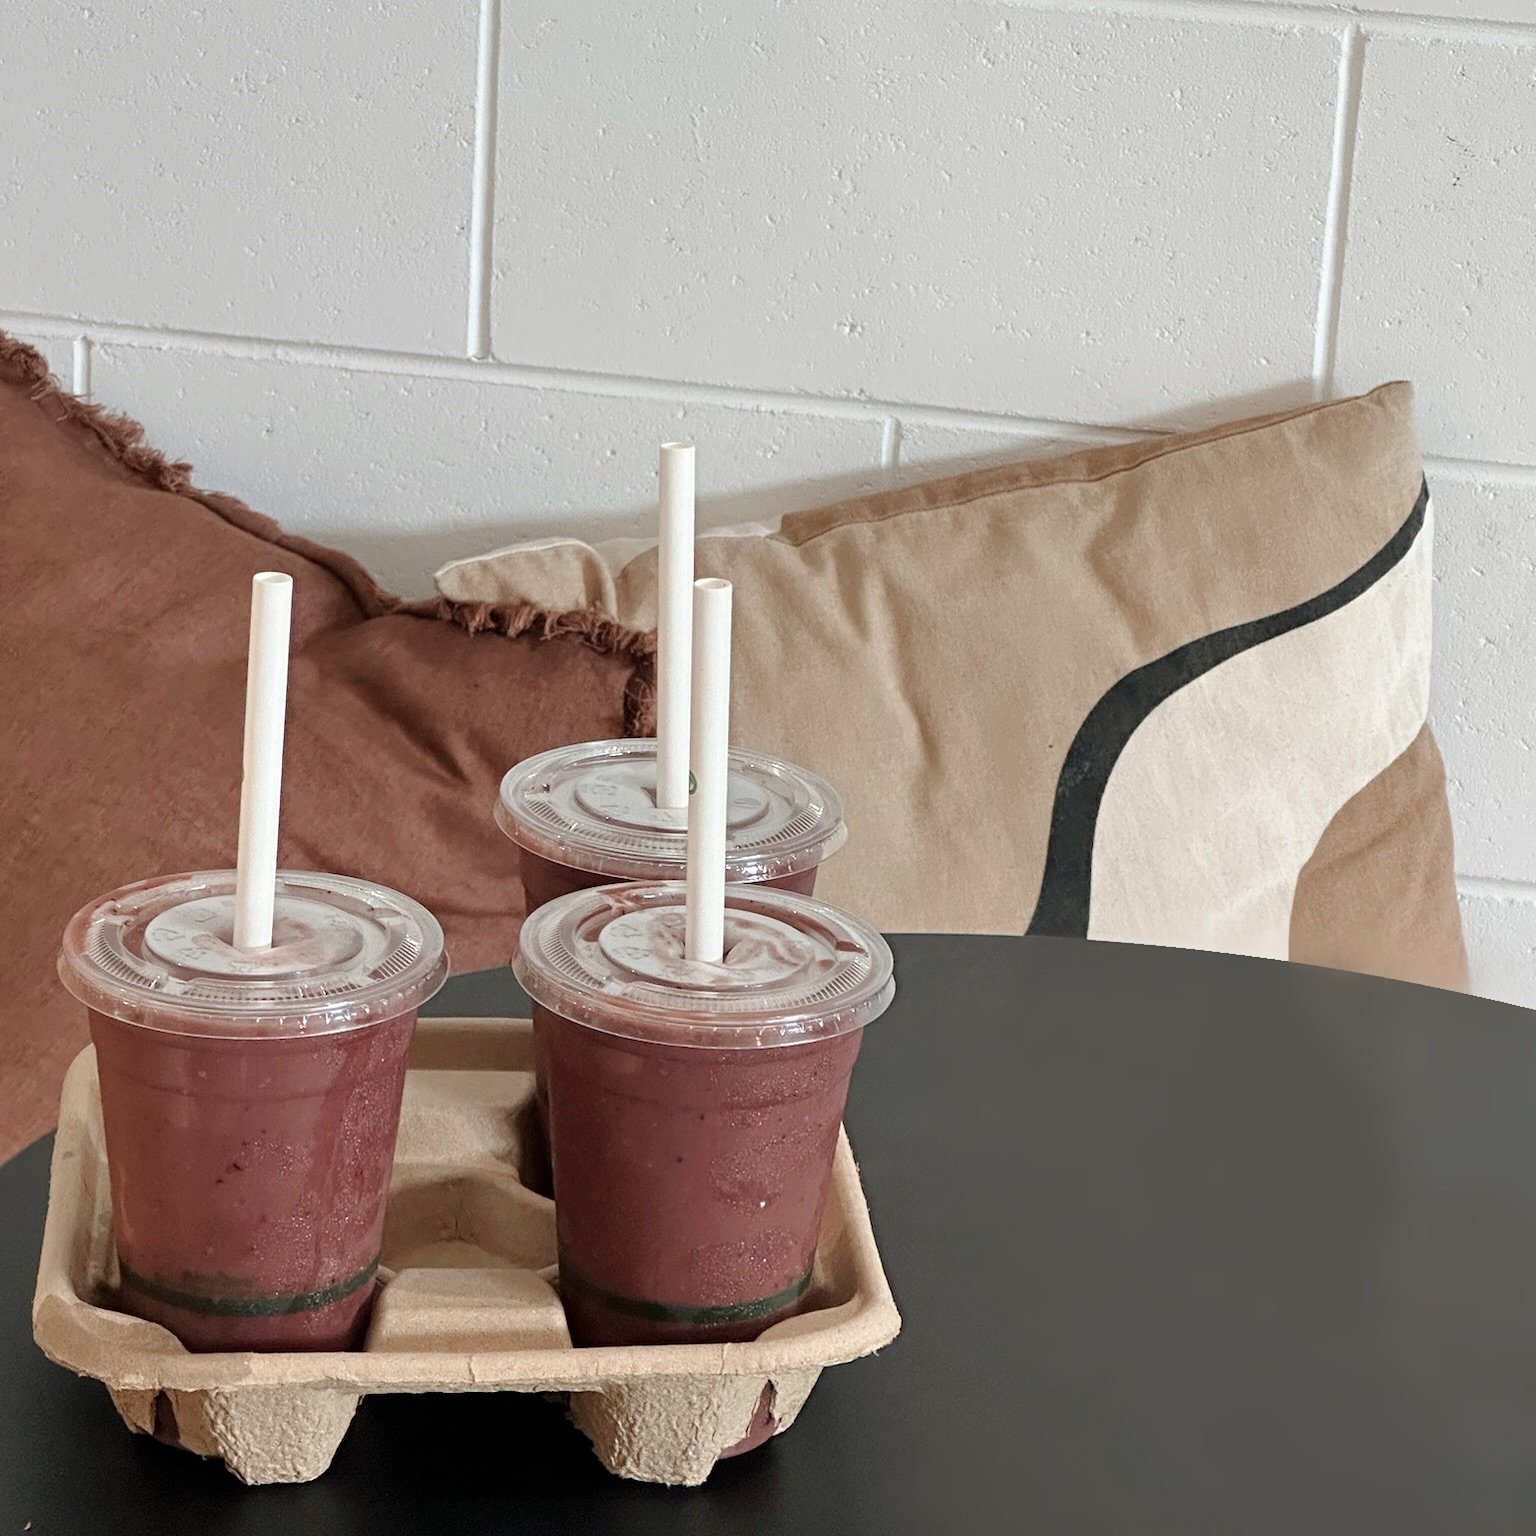 Saturdays are for smoothies 〰️ have you tried our smoothie menu yet? 

#smoothies #sunshinecoast #cafe #marcoola #bobbilane #weekendvibes